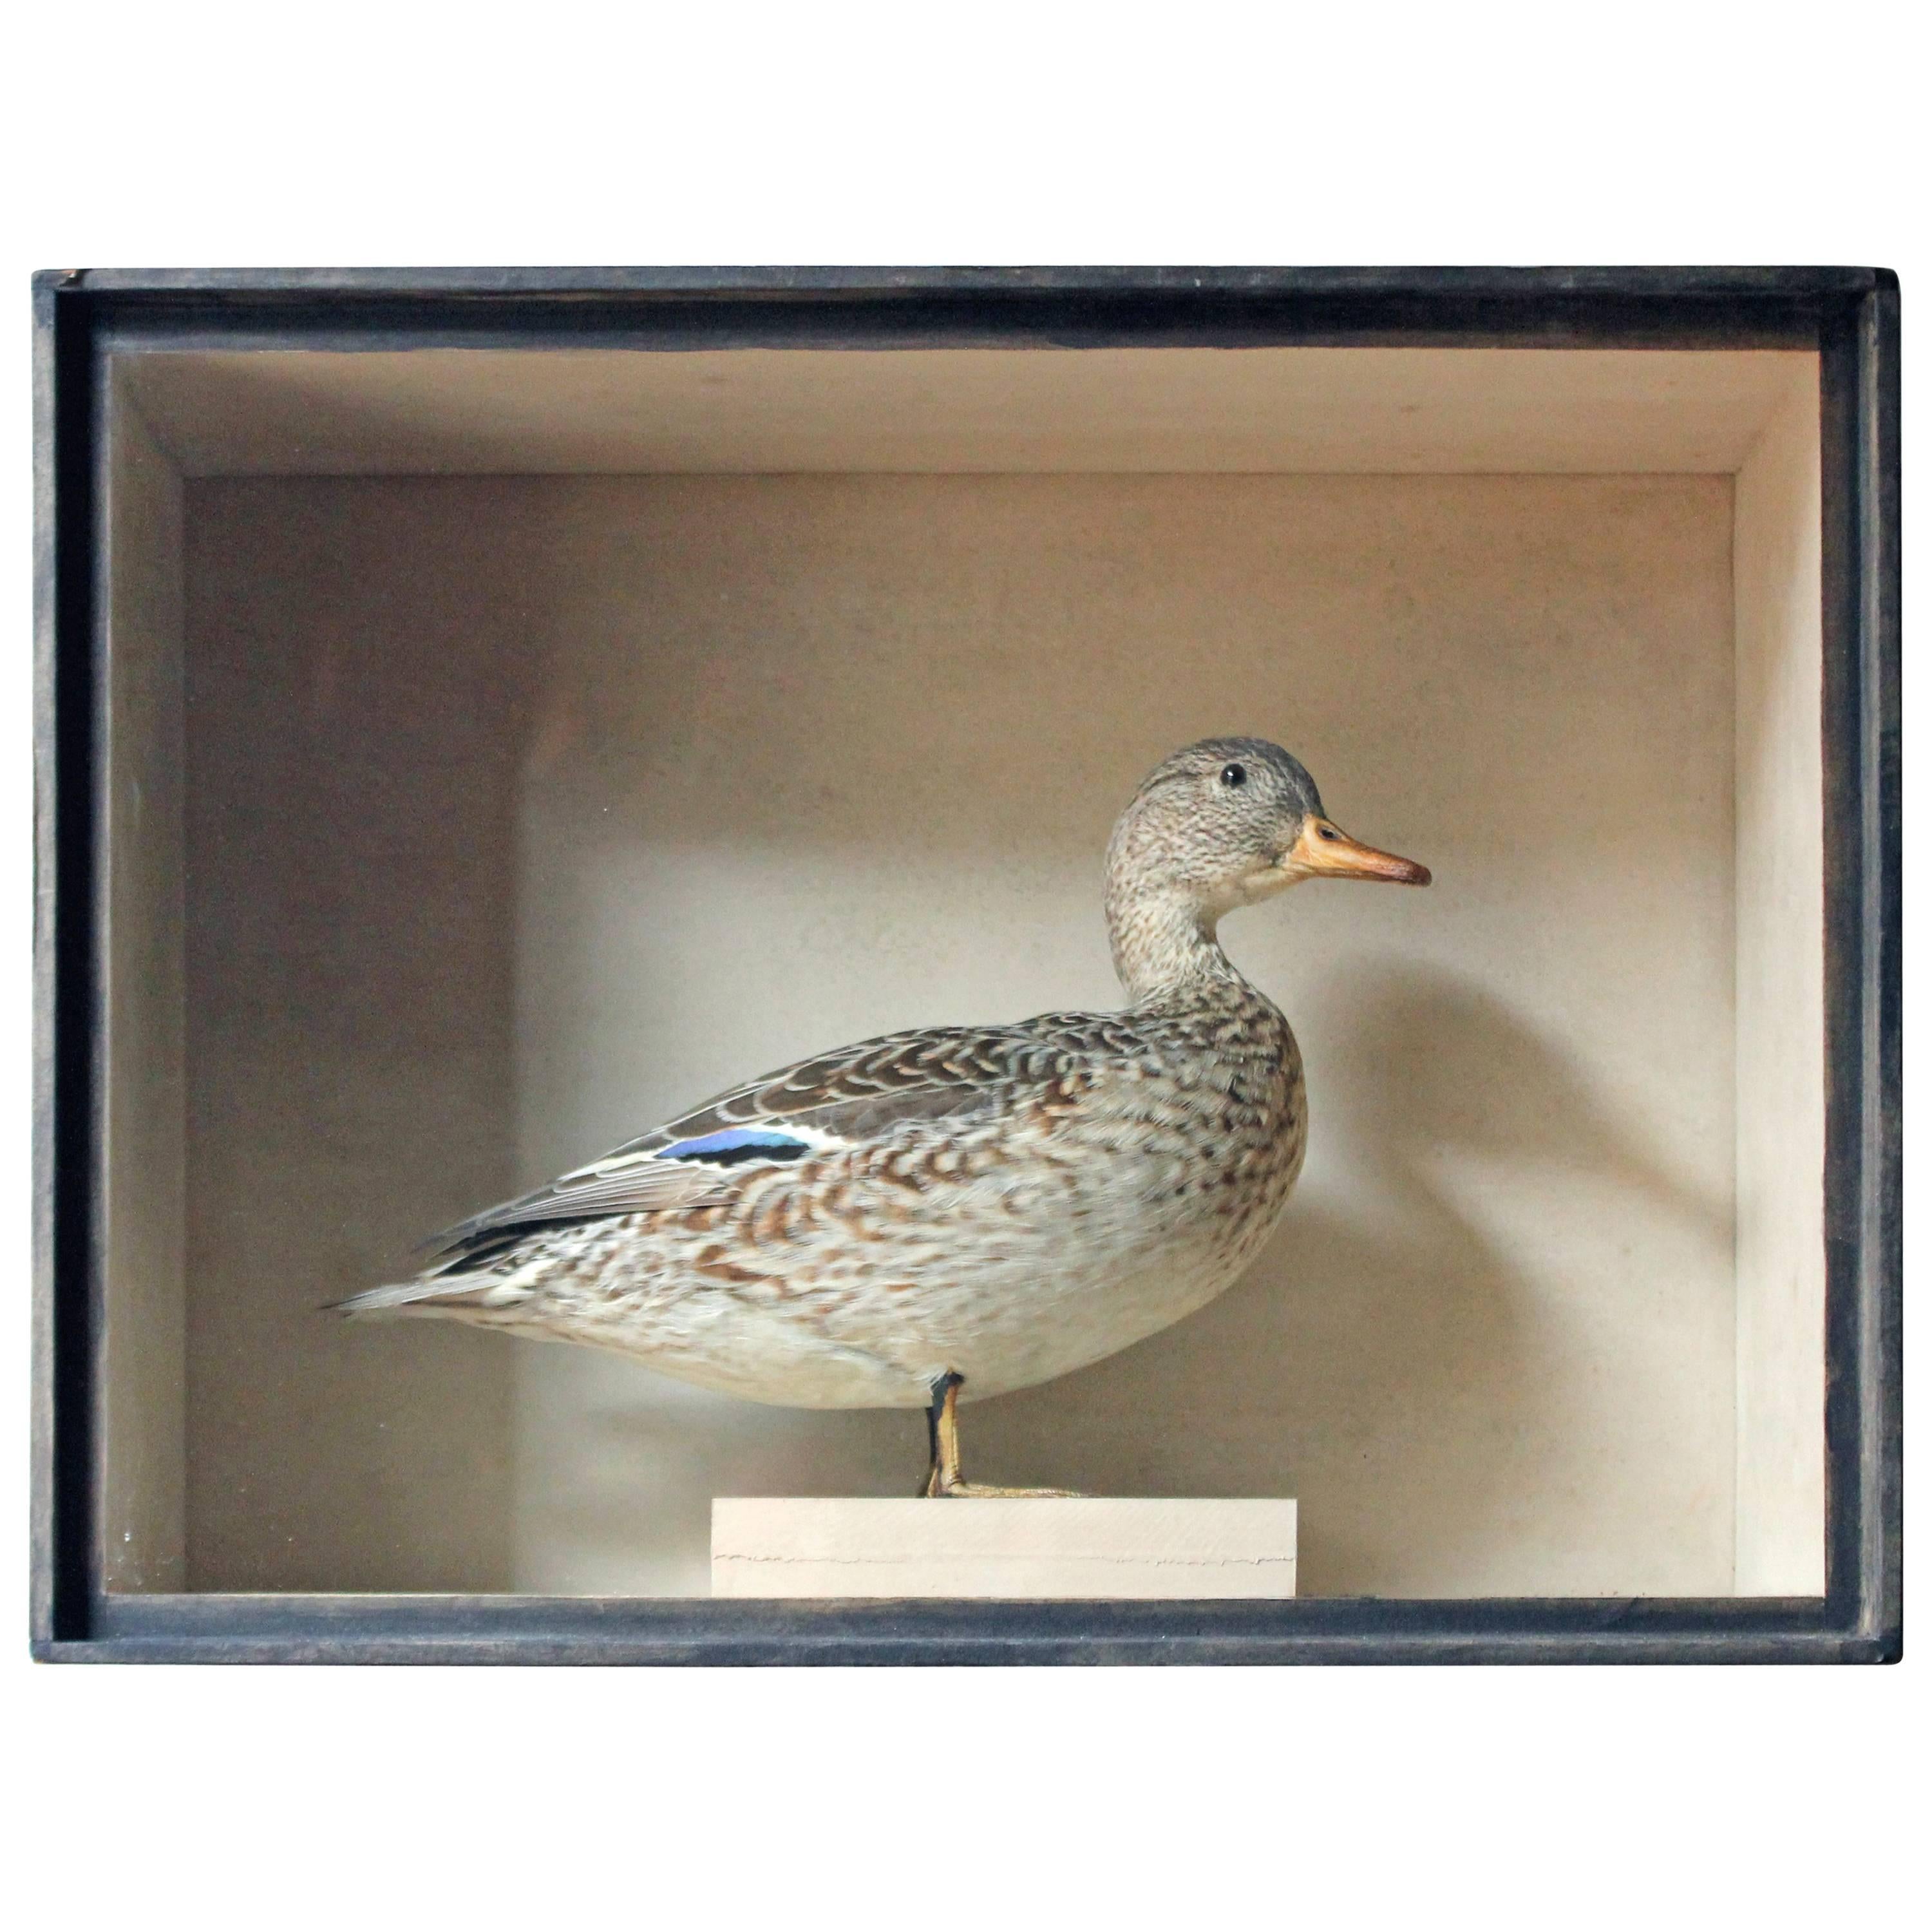 Museum Cased Taxidermy Female Teal, circa 1865-1885, R.Duncan of Newcastle